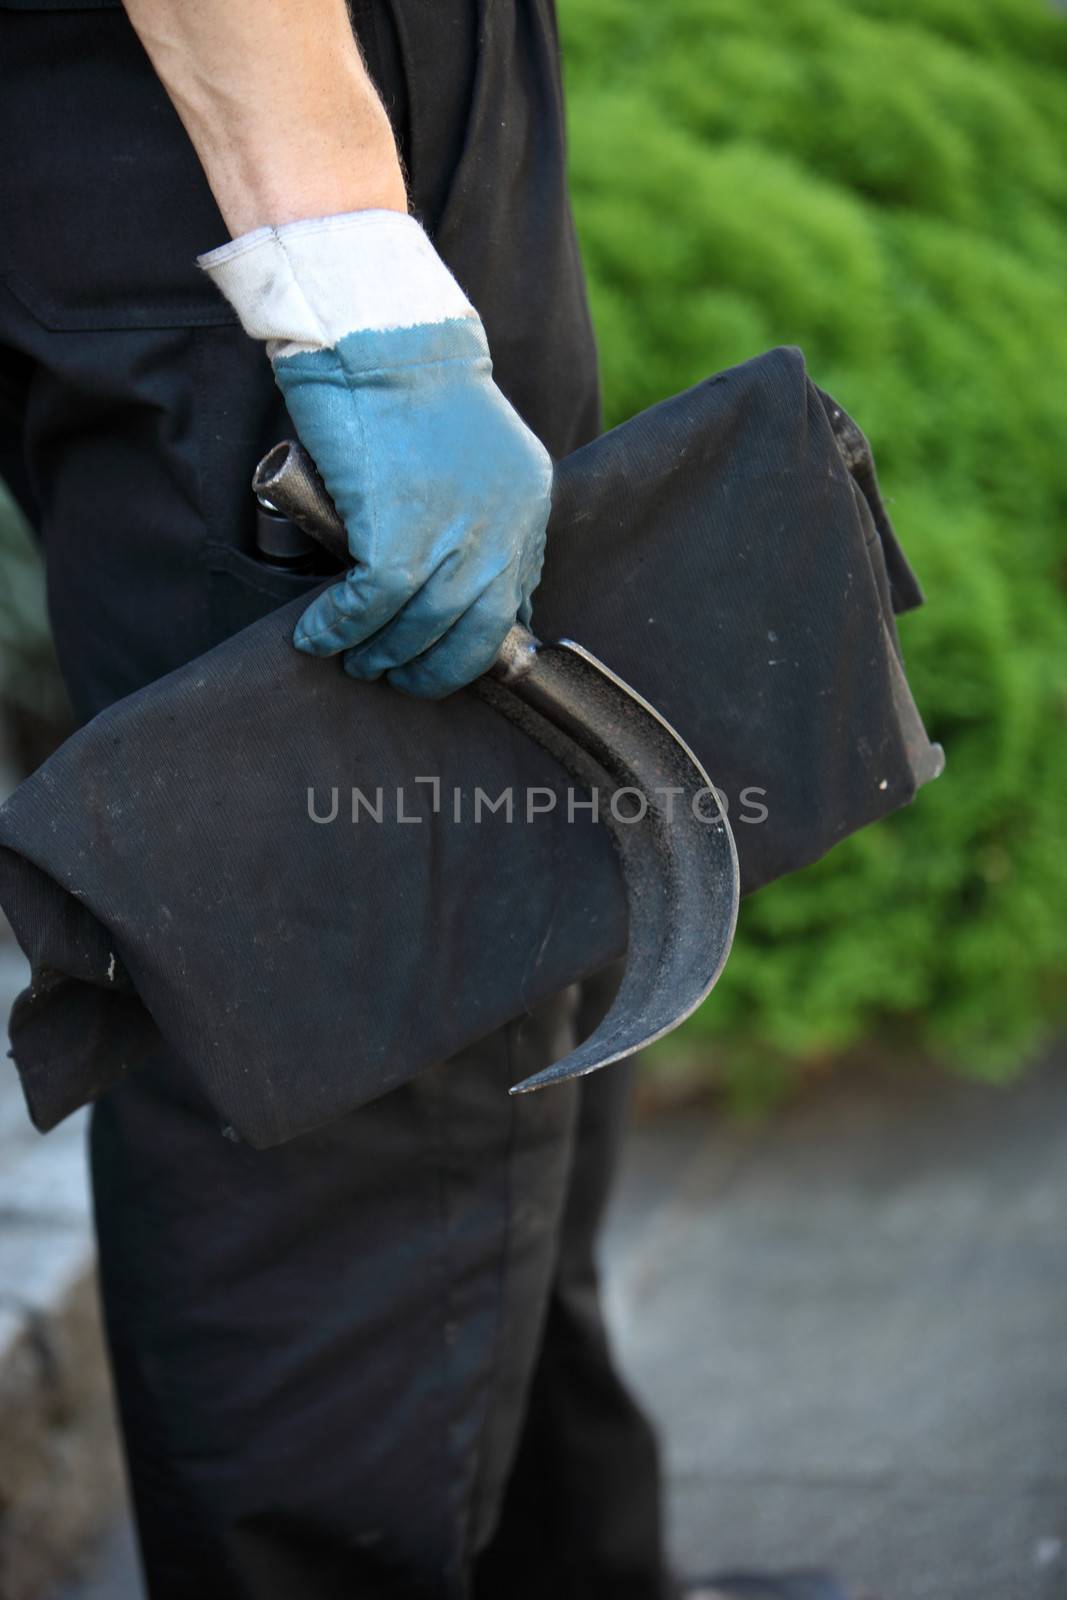 Chimney sweep holding a scraping tool by Farina6000